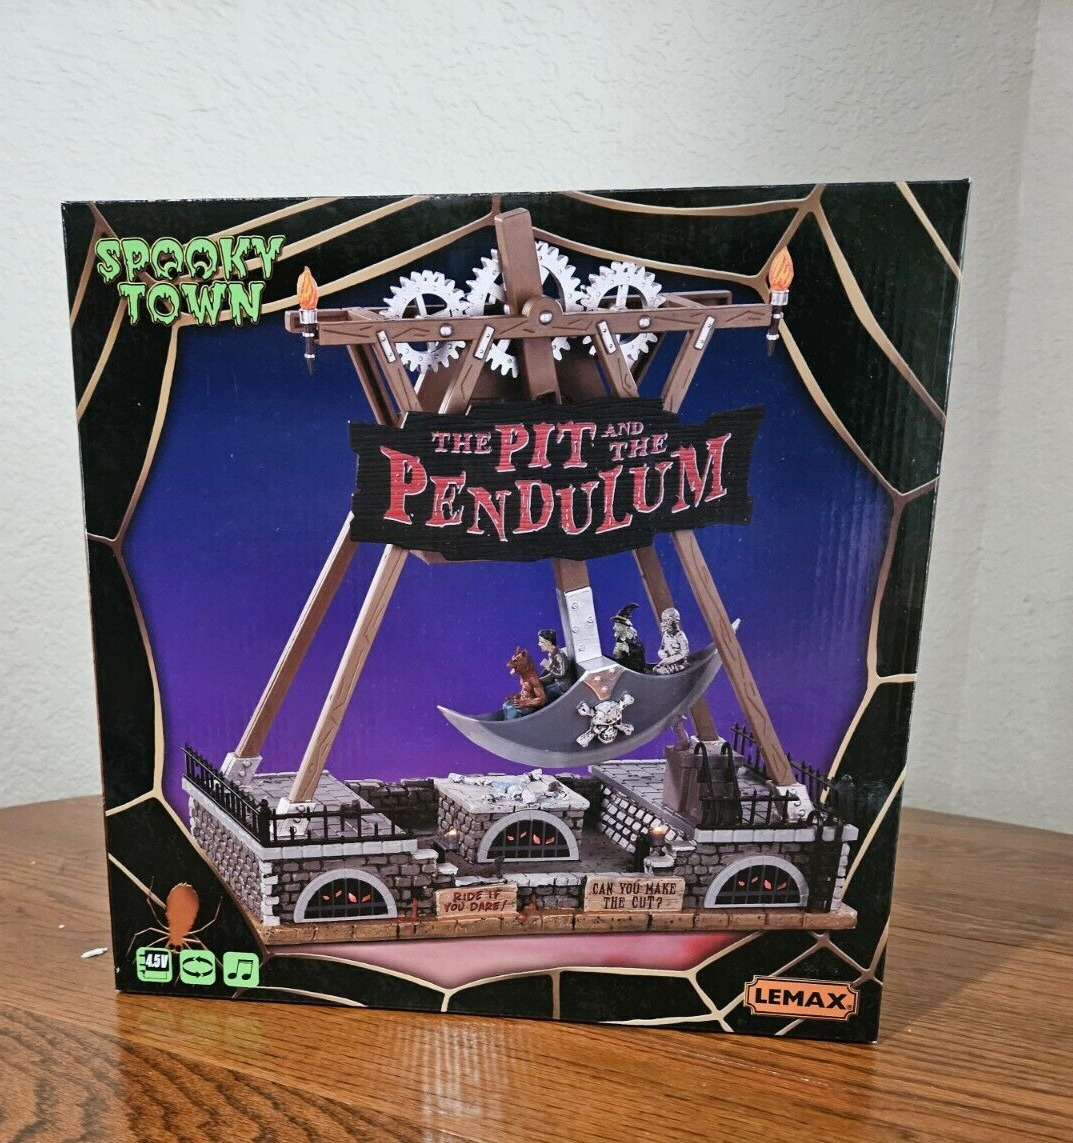 Lemax Spooky Town Halloween THE PIT AND THE PENDULUM #04704 - Brand New in Box